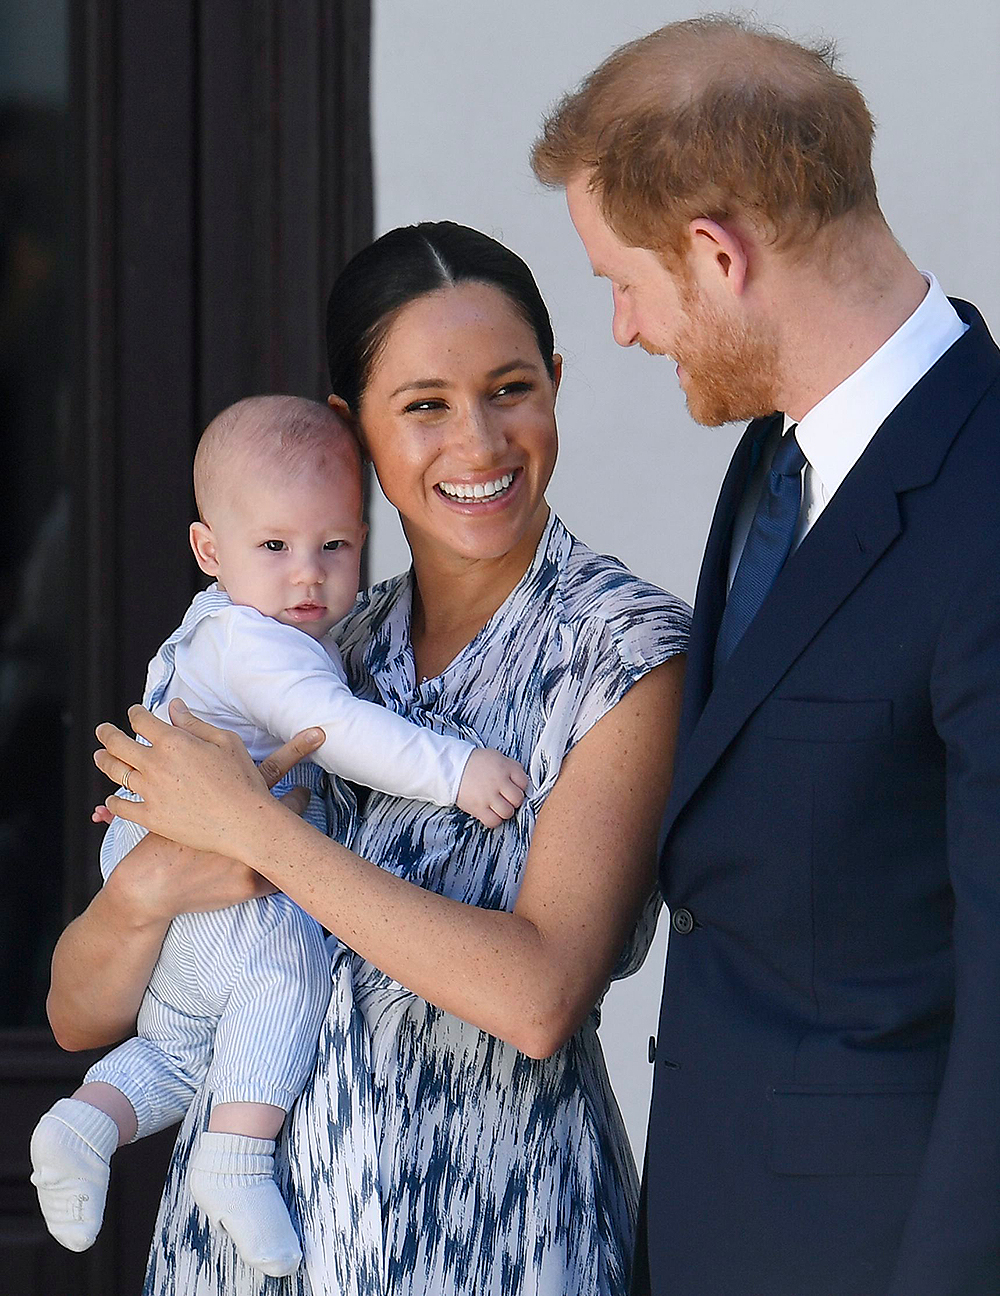 Royal Baby Prince Archie UK The Sun 9th May 2019 PRINCE HARRY & MEGHAN MARKLE 